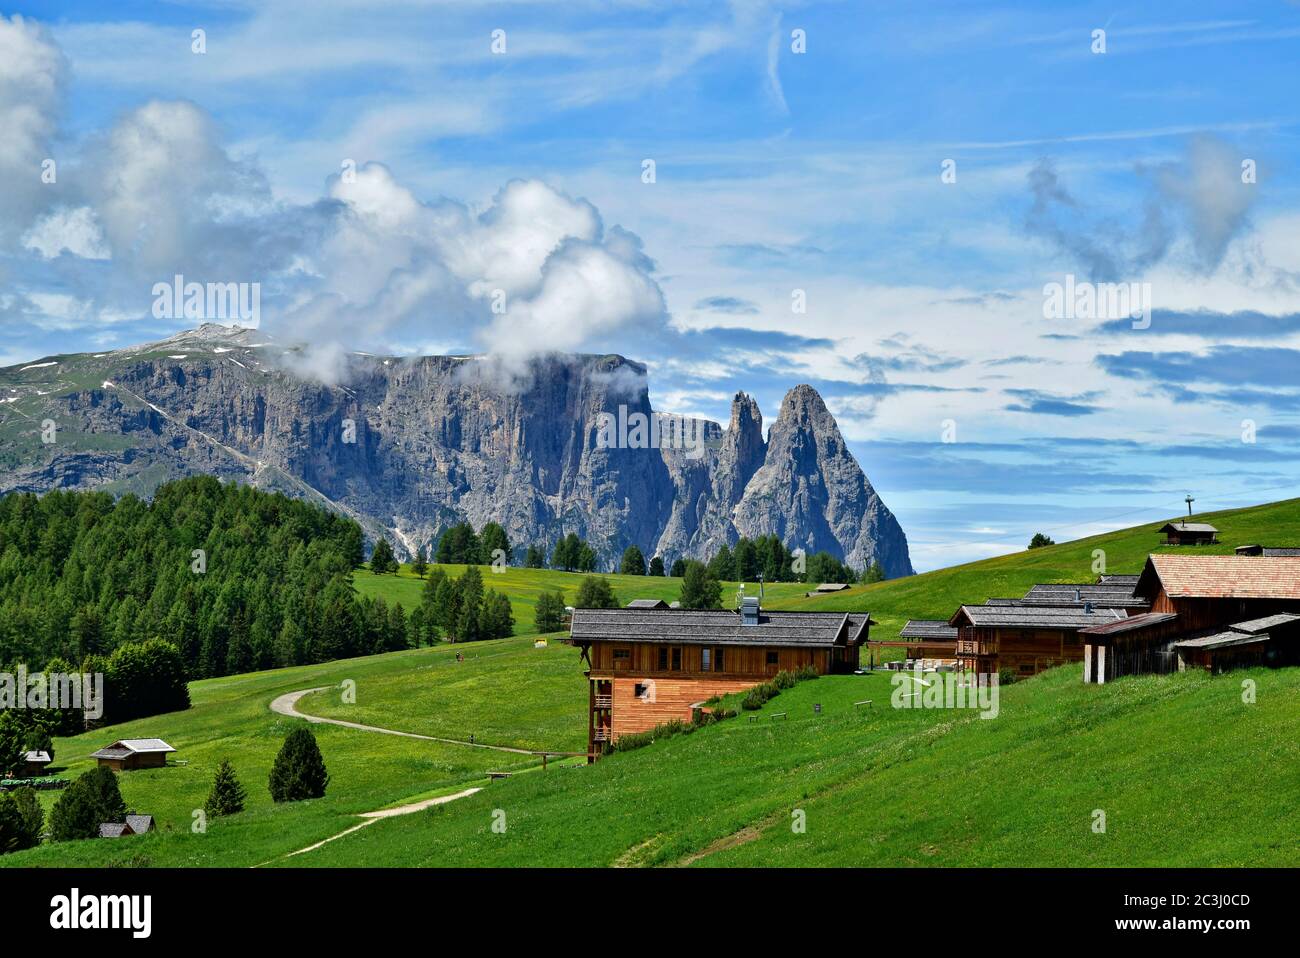 Small alpine hill village with rock mountain background on Alpe di Siusi, Dolomites, Italy Stock Photo